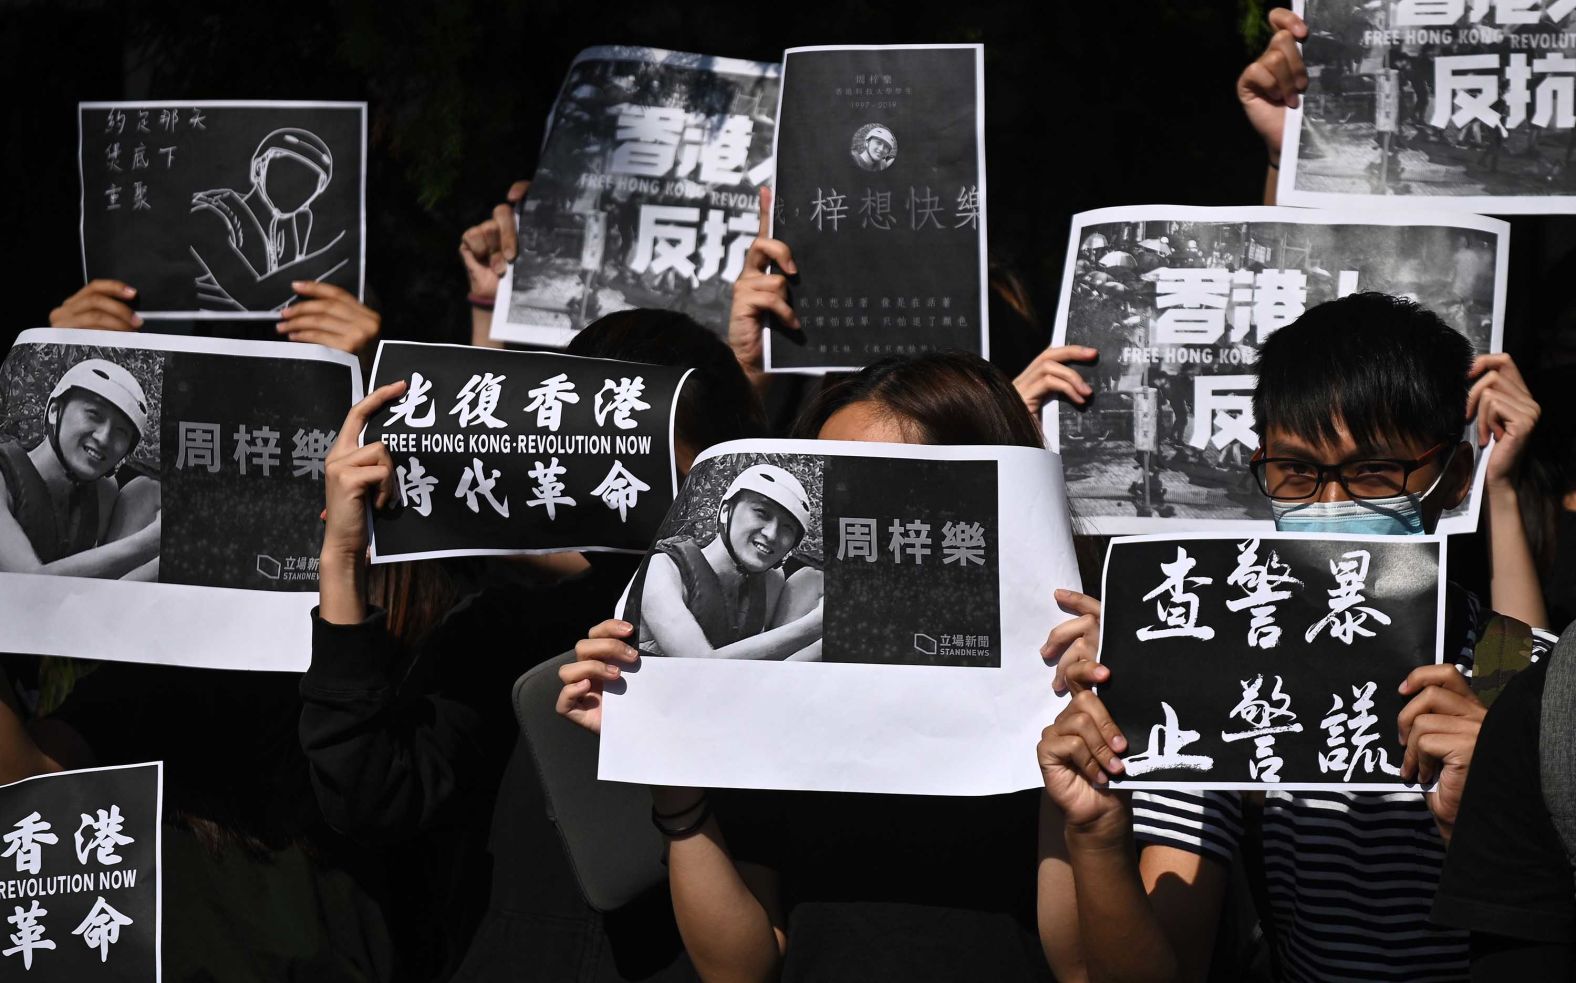 Students of the Hong Kong University of Science and Technology (HKUST) participate in a march on November 8, after hospital officials confirmed the <a href="index.php?page=&url=https%3A%2F%2Fedition.cnn.com%2F2019%2F11%2F07%2Fasia%2Fhong-kong-protester-death-intl-hnk%2Findex.html" target="_blank">death of student Chow Tsz-lok</a>, 22. Police say Chow, a computer sciences student at HKUST, fell from the third floor to the second floor of a parking garage in the residential area of Tseung Kwan O in the early hours of November 4.